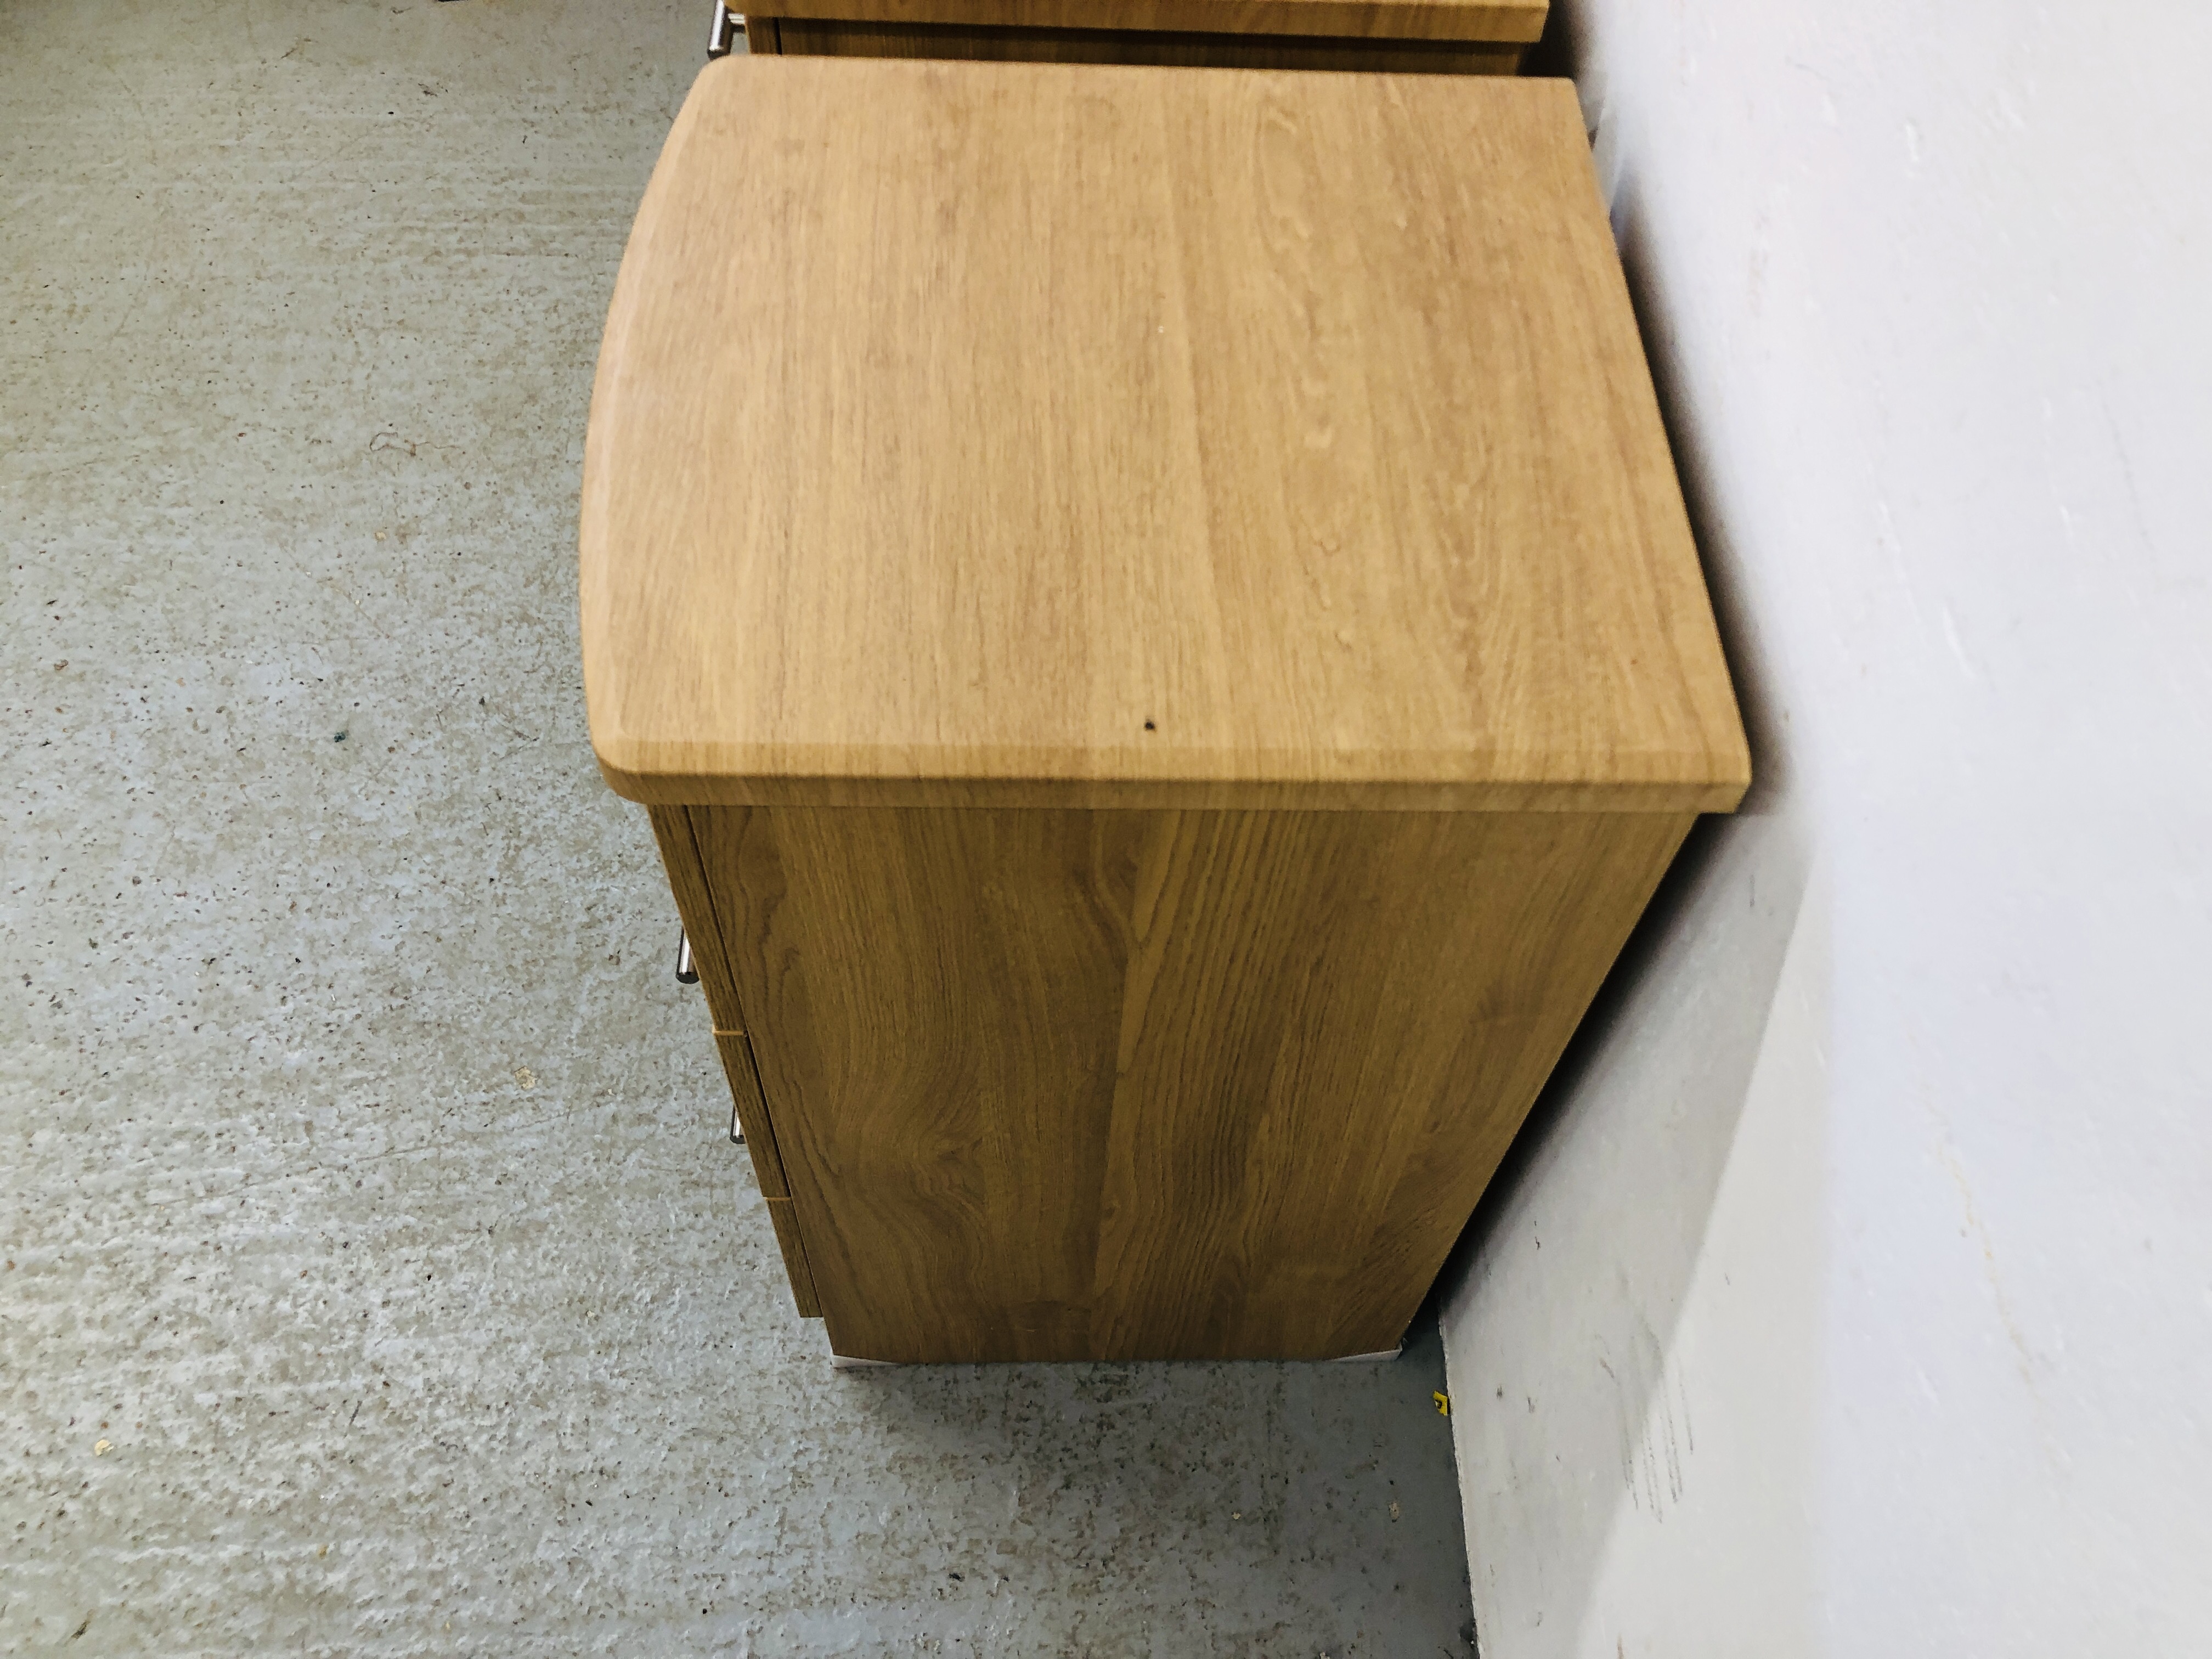 PAIR OF MODERN LIGHT OAK FINISH THREE DRAWER BEDSIDE CHESTS - Image 4 of 6